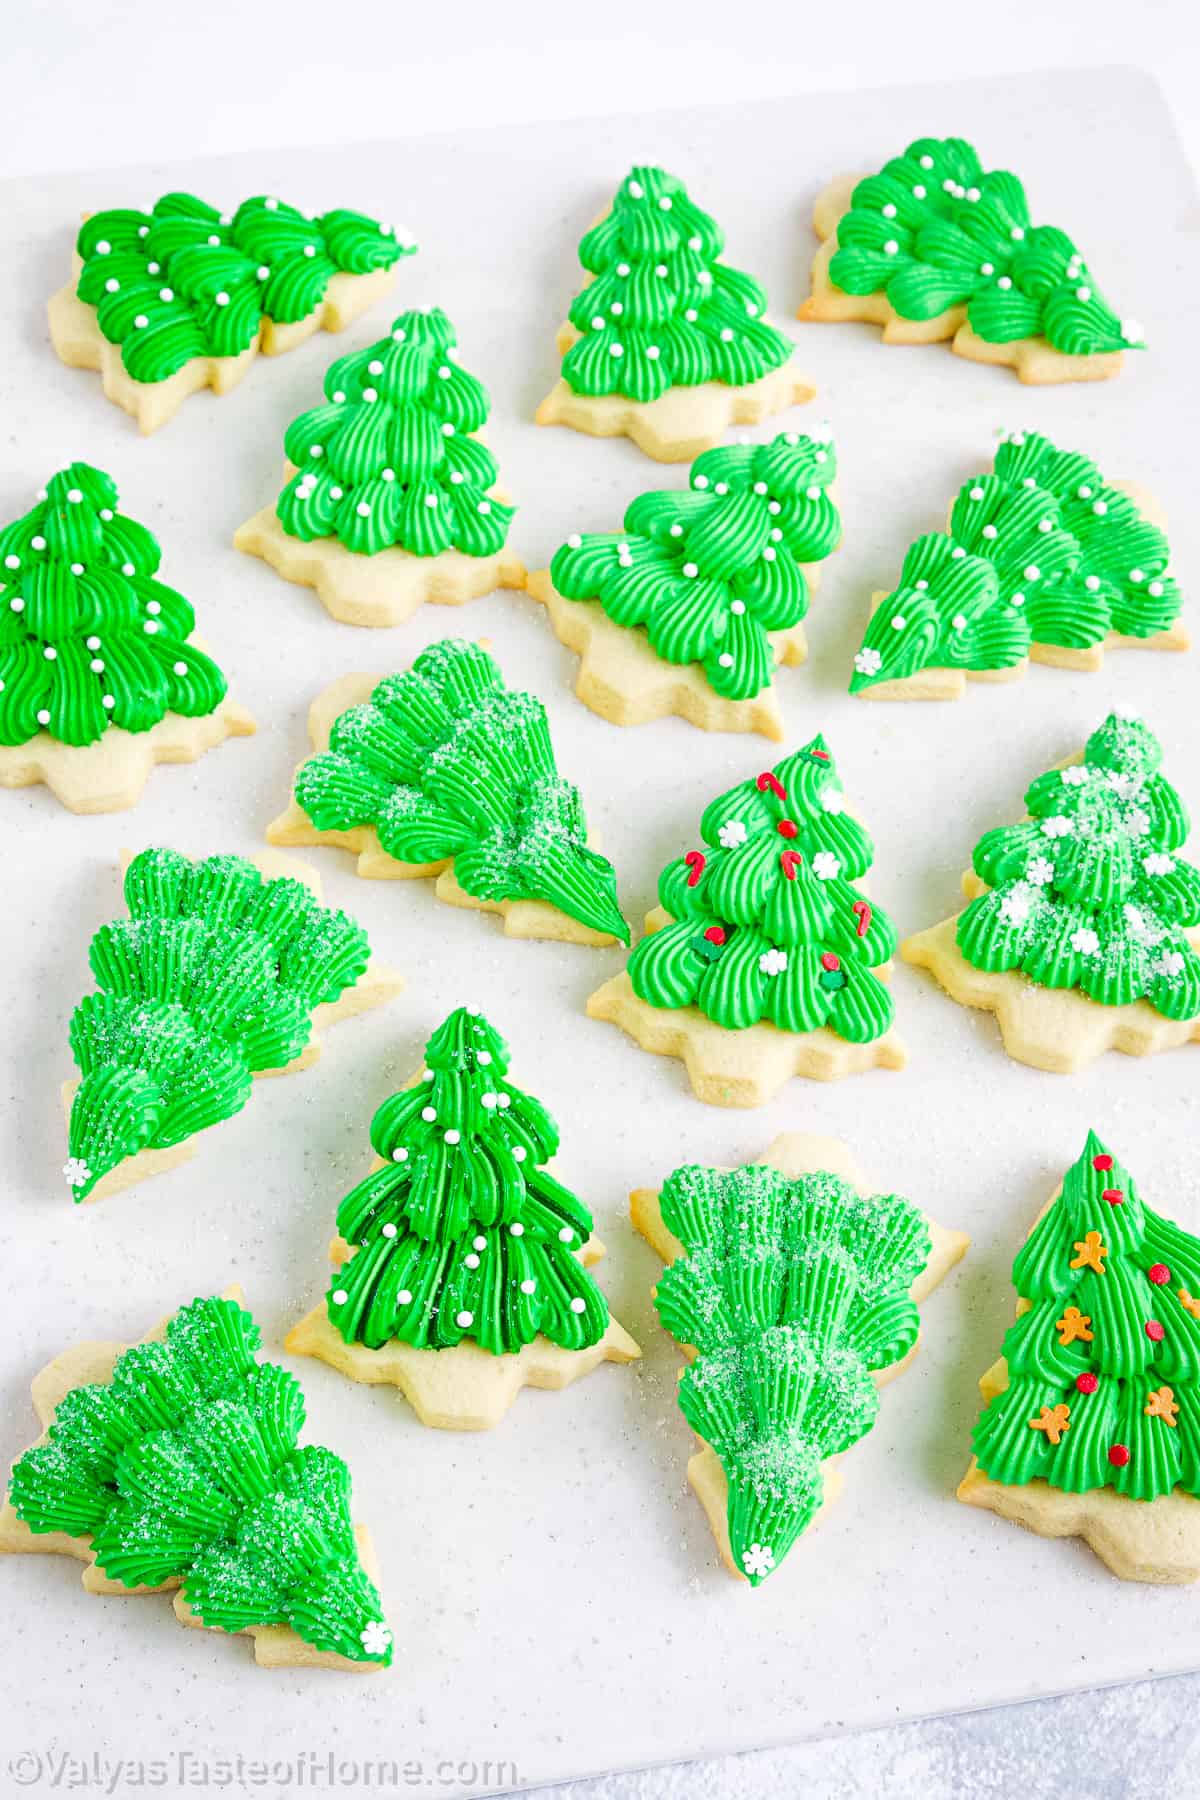 The process of rolling out the dough and using cookie cutters to create Christmas tree shapes is a baking tradition that many people enjoy.